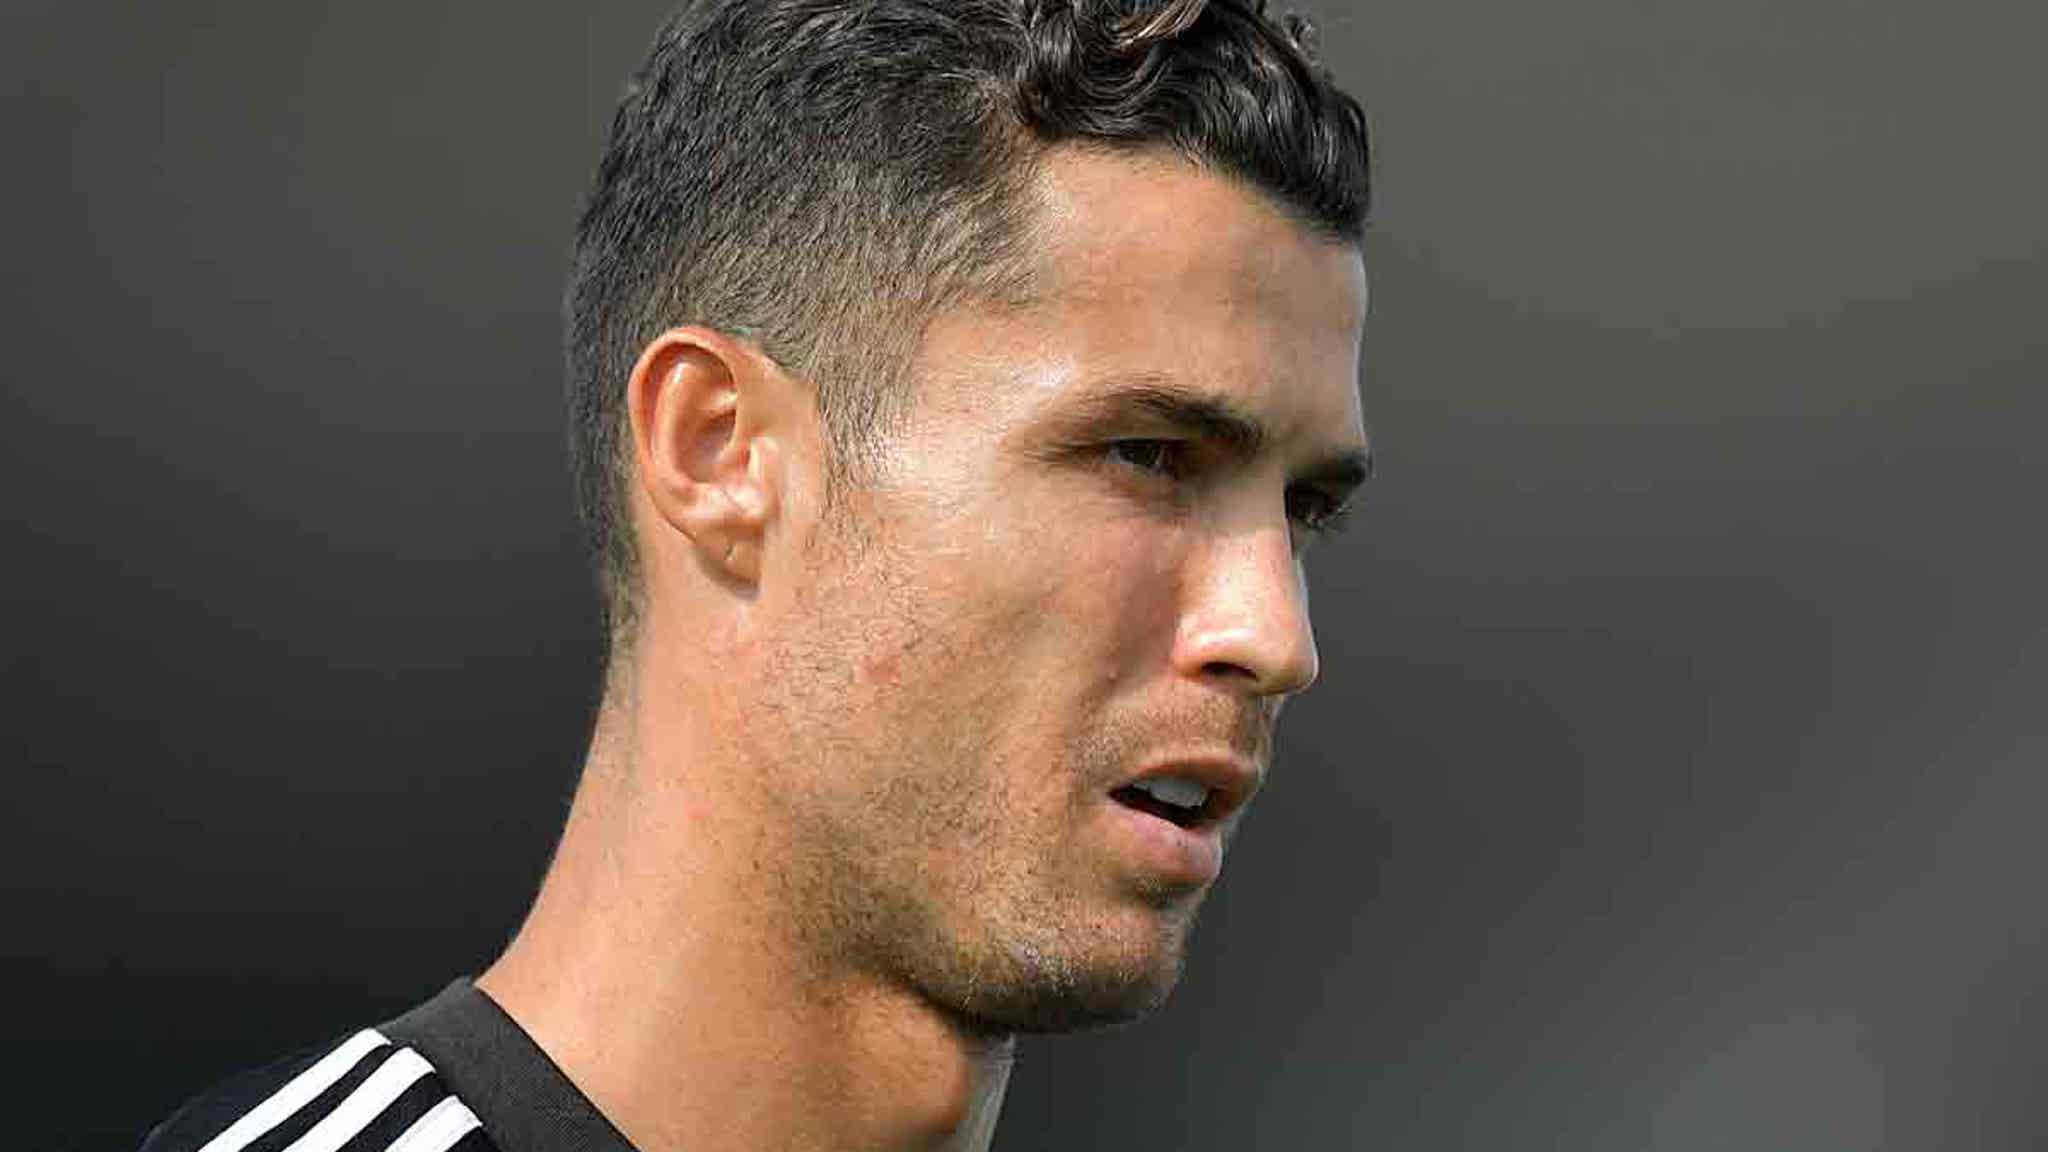 Cristiano Ronaldo is asking a judge to move the civil lawsuit against him t...